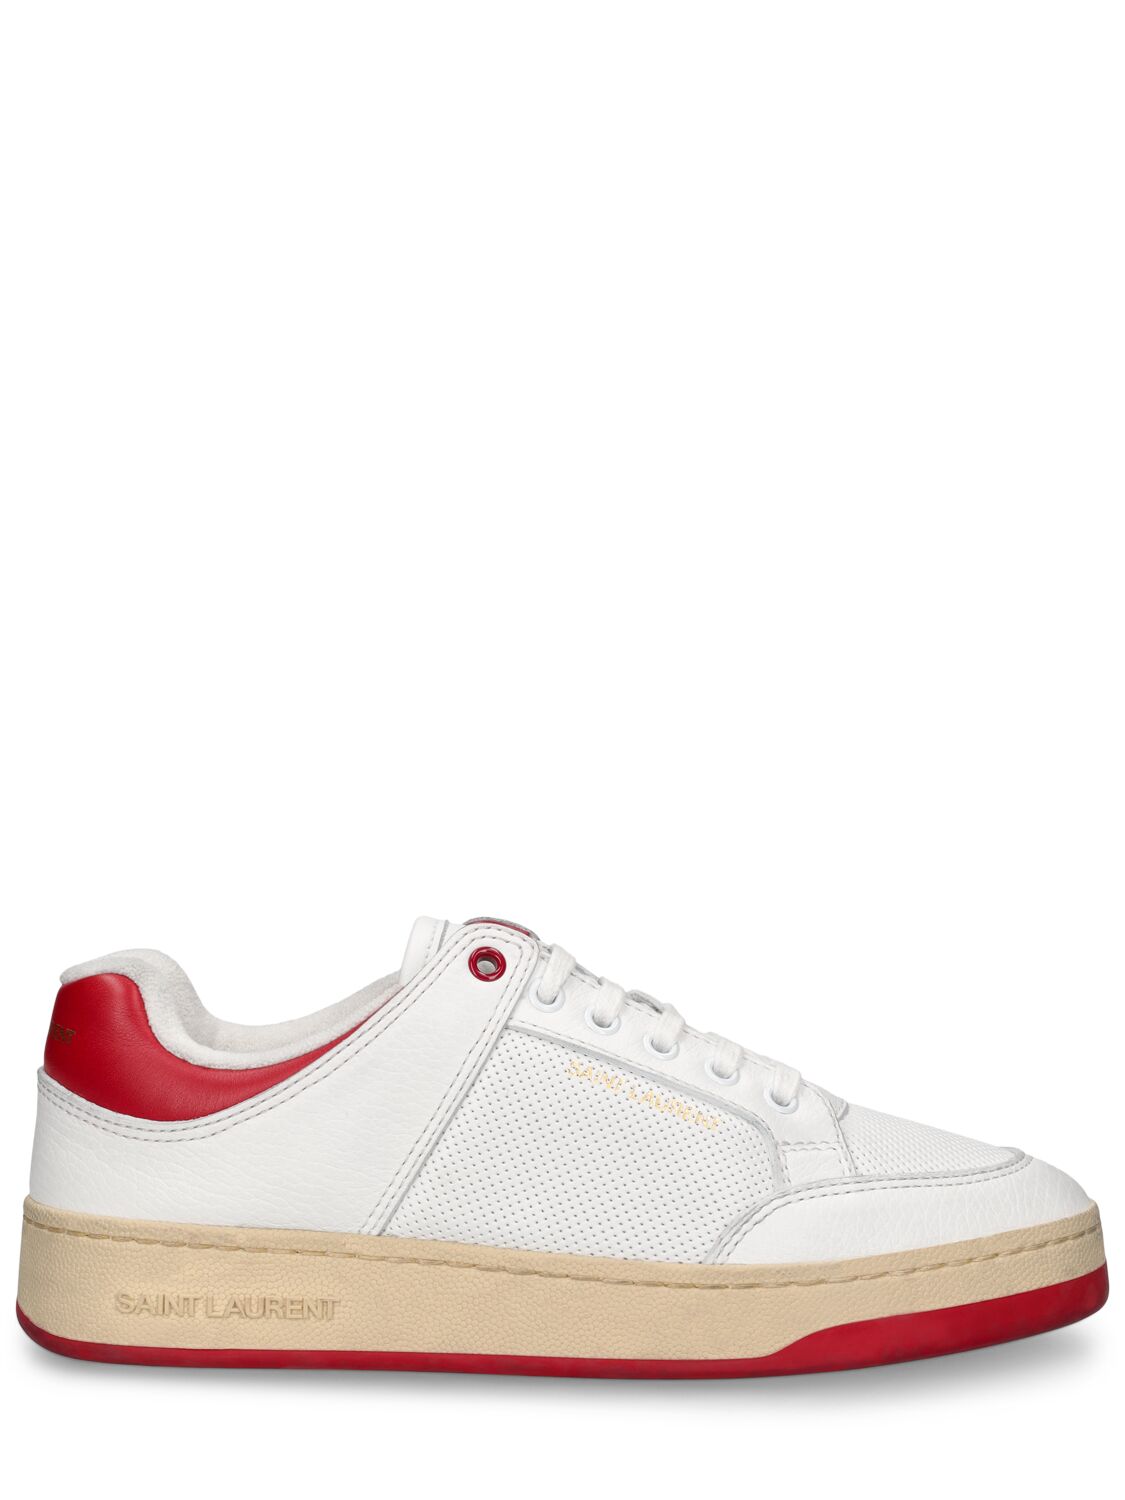 Saint Laurent 20mm Sl61 Leather Sneakers In White,red